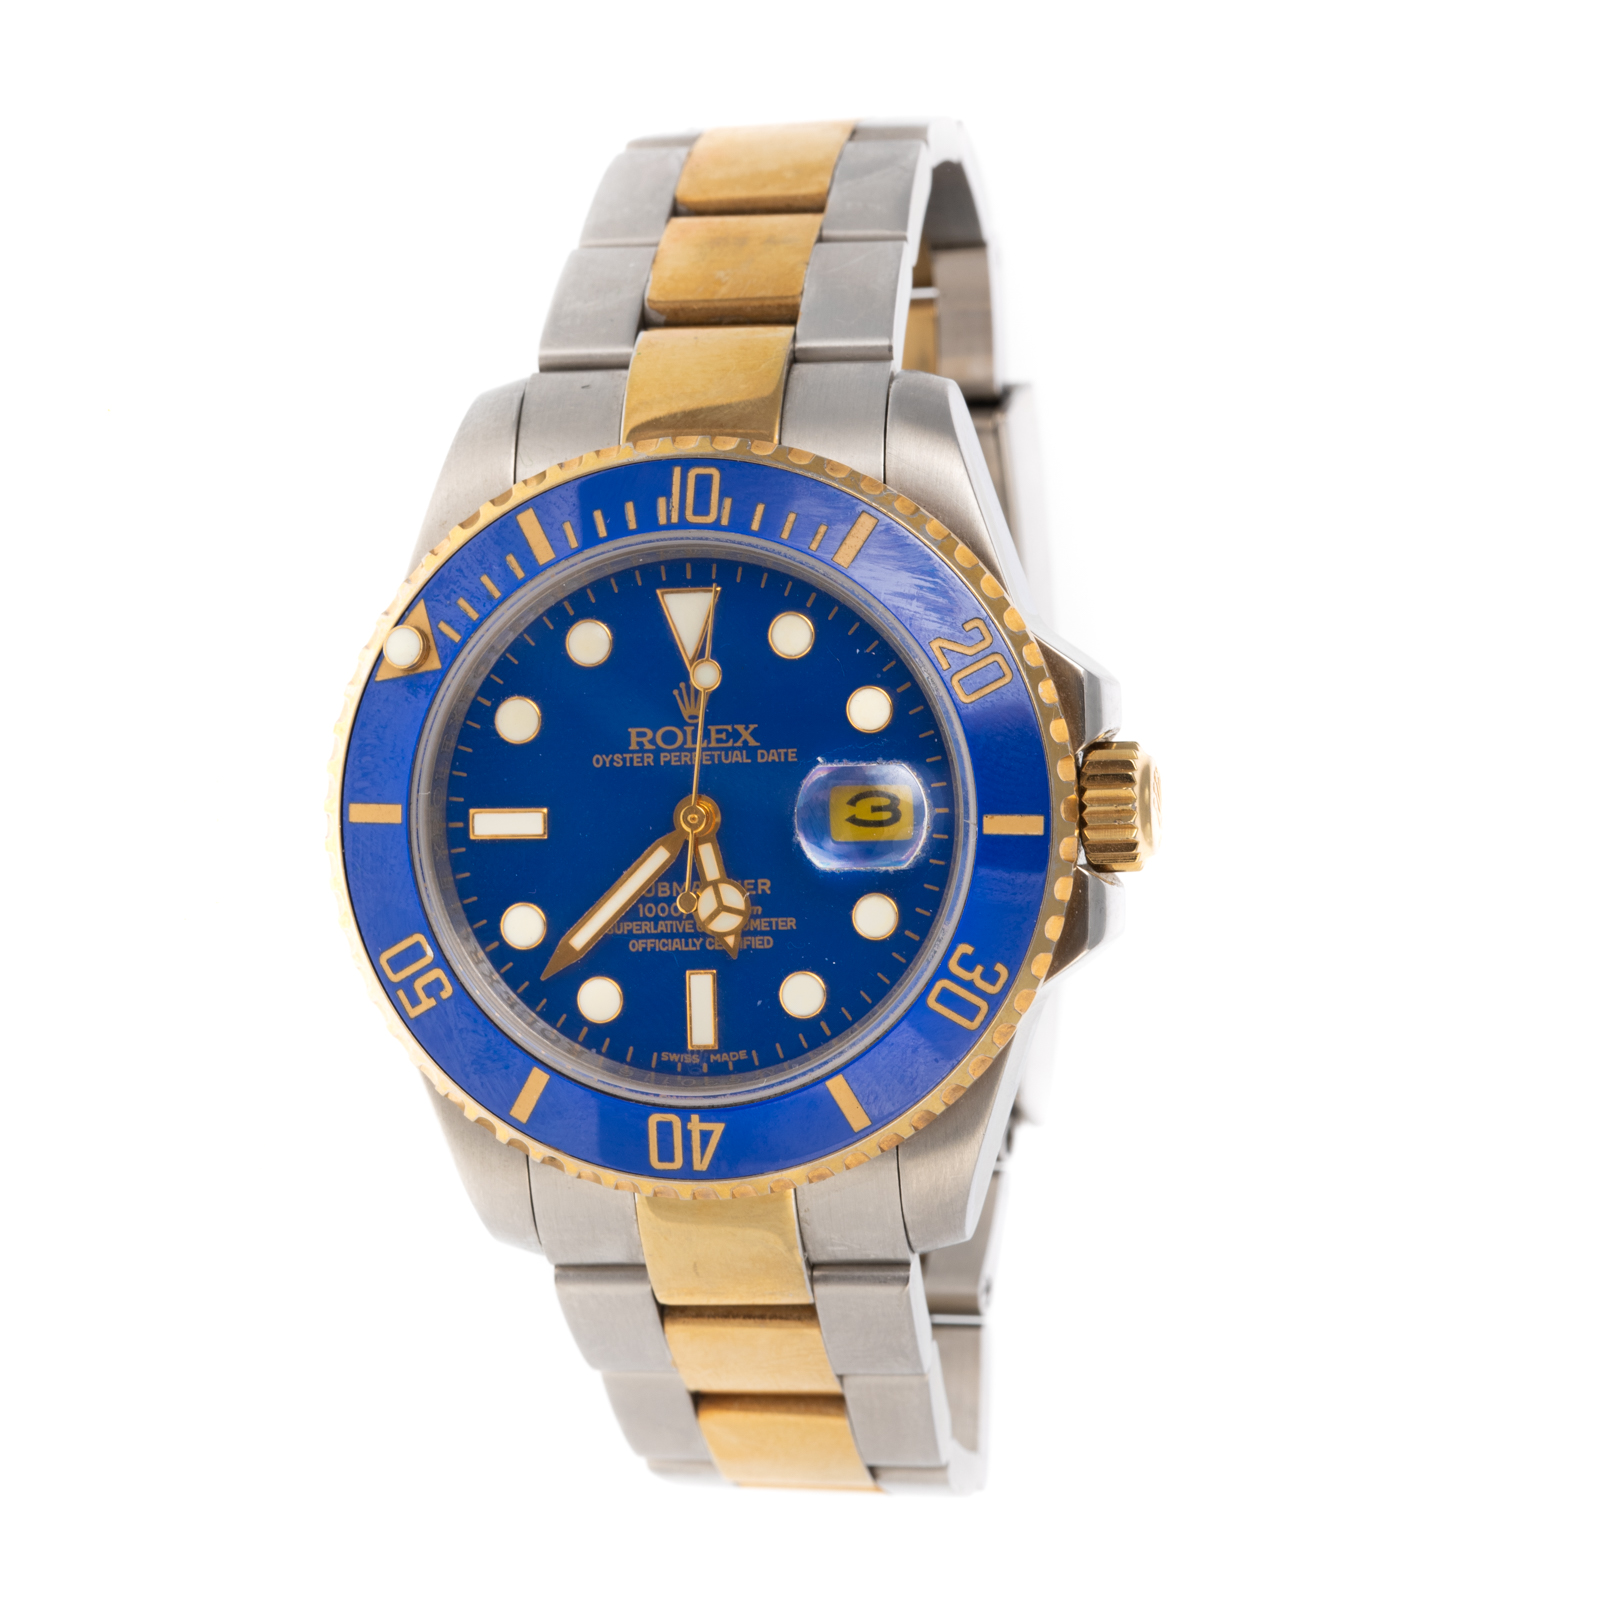 A TWO TONE ROLEX SUBMARINER WRIST 2878ad